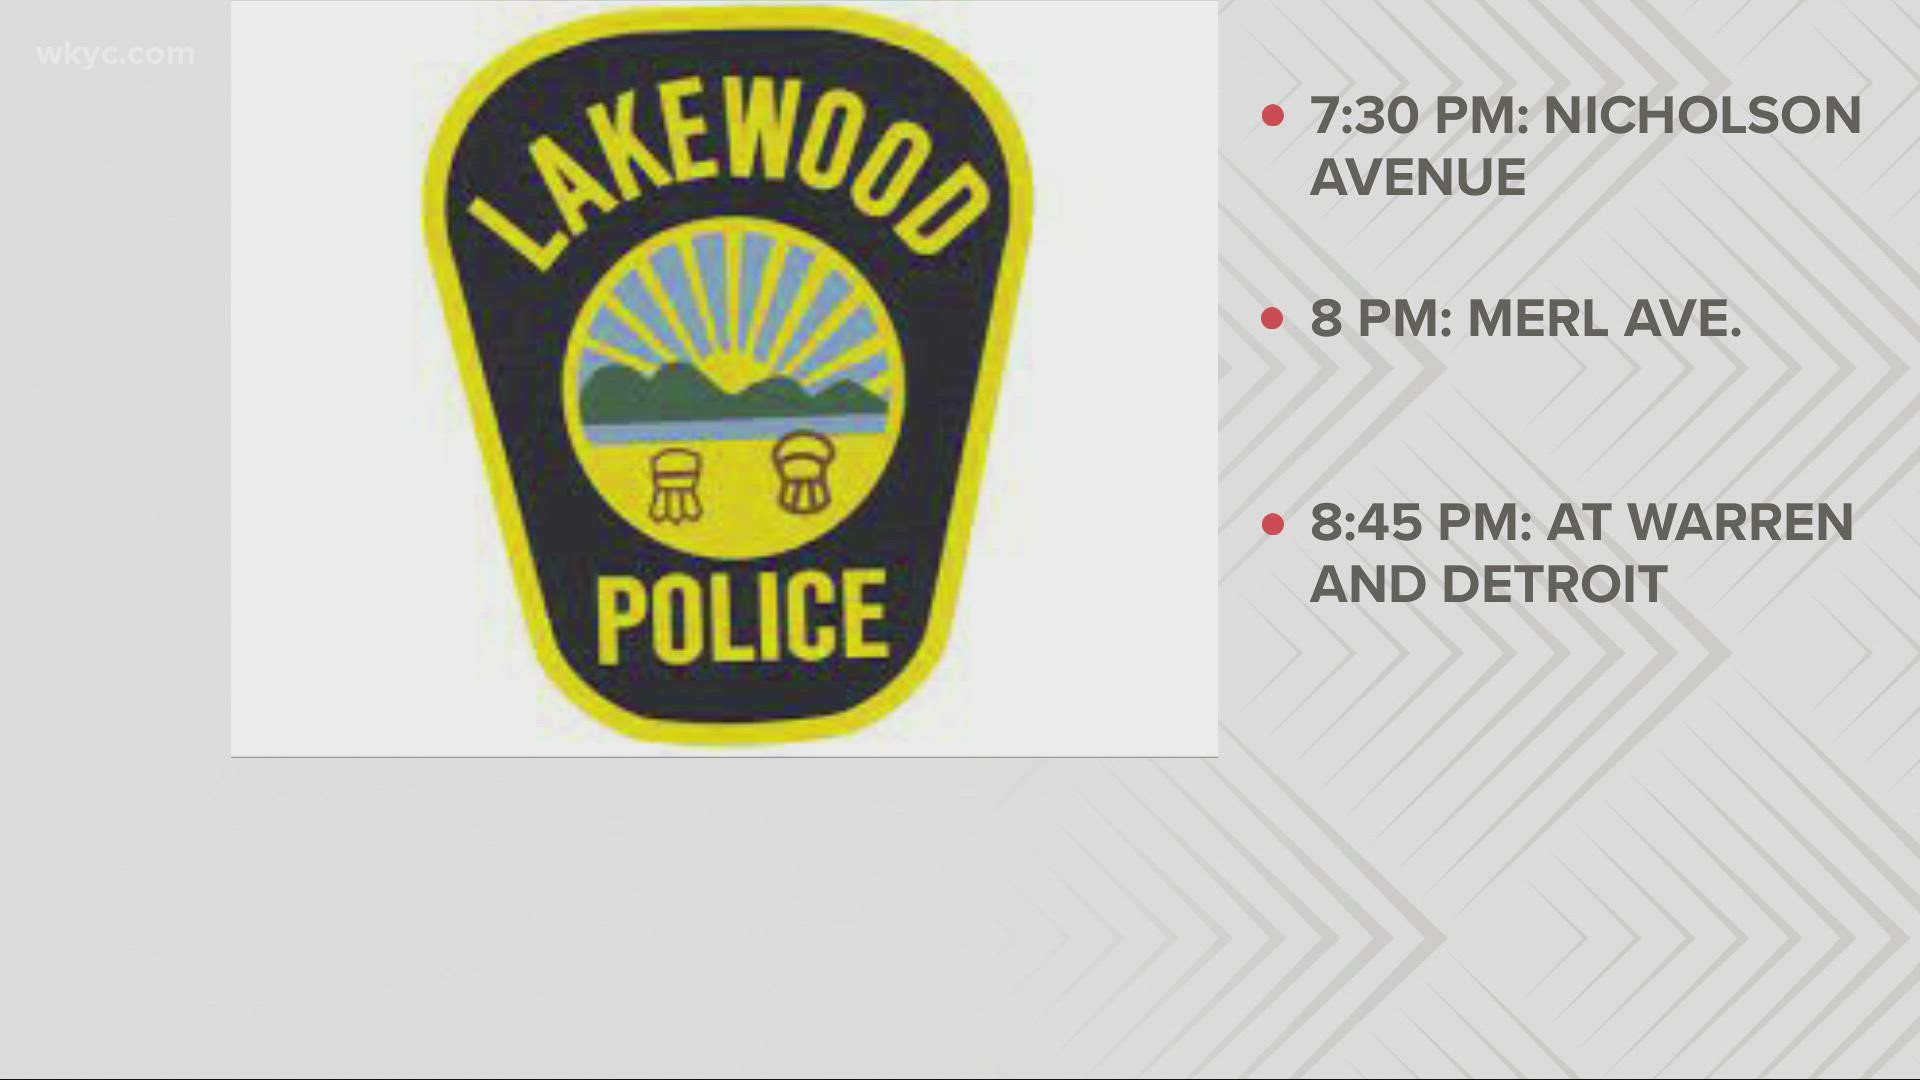 Lakewood Police are reminding residents to be aware of their surroundings, and to contact the Lakewood Police Department if they see any suspicious activity.